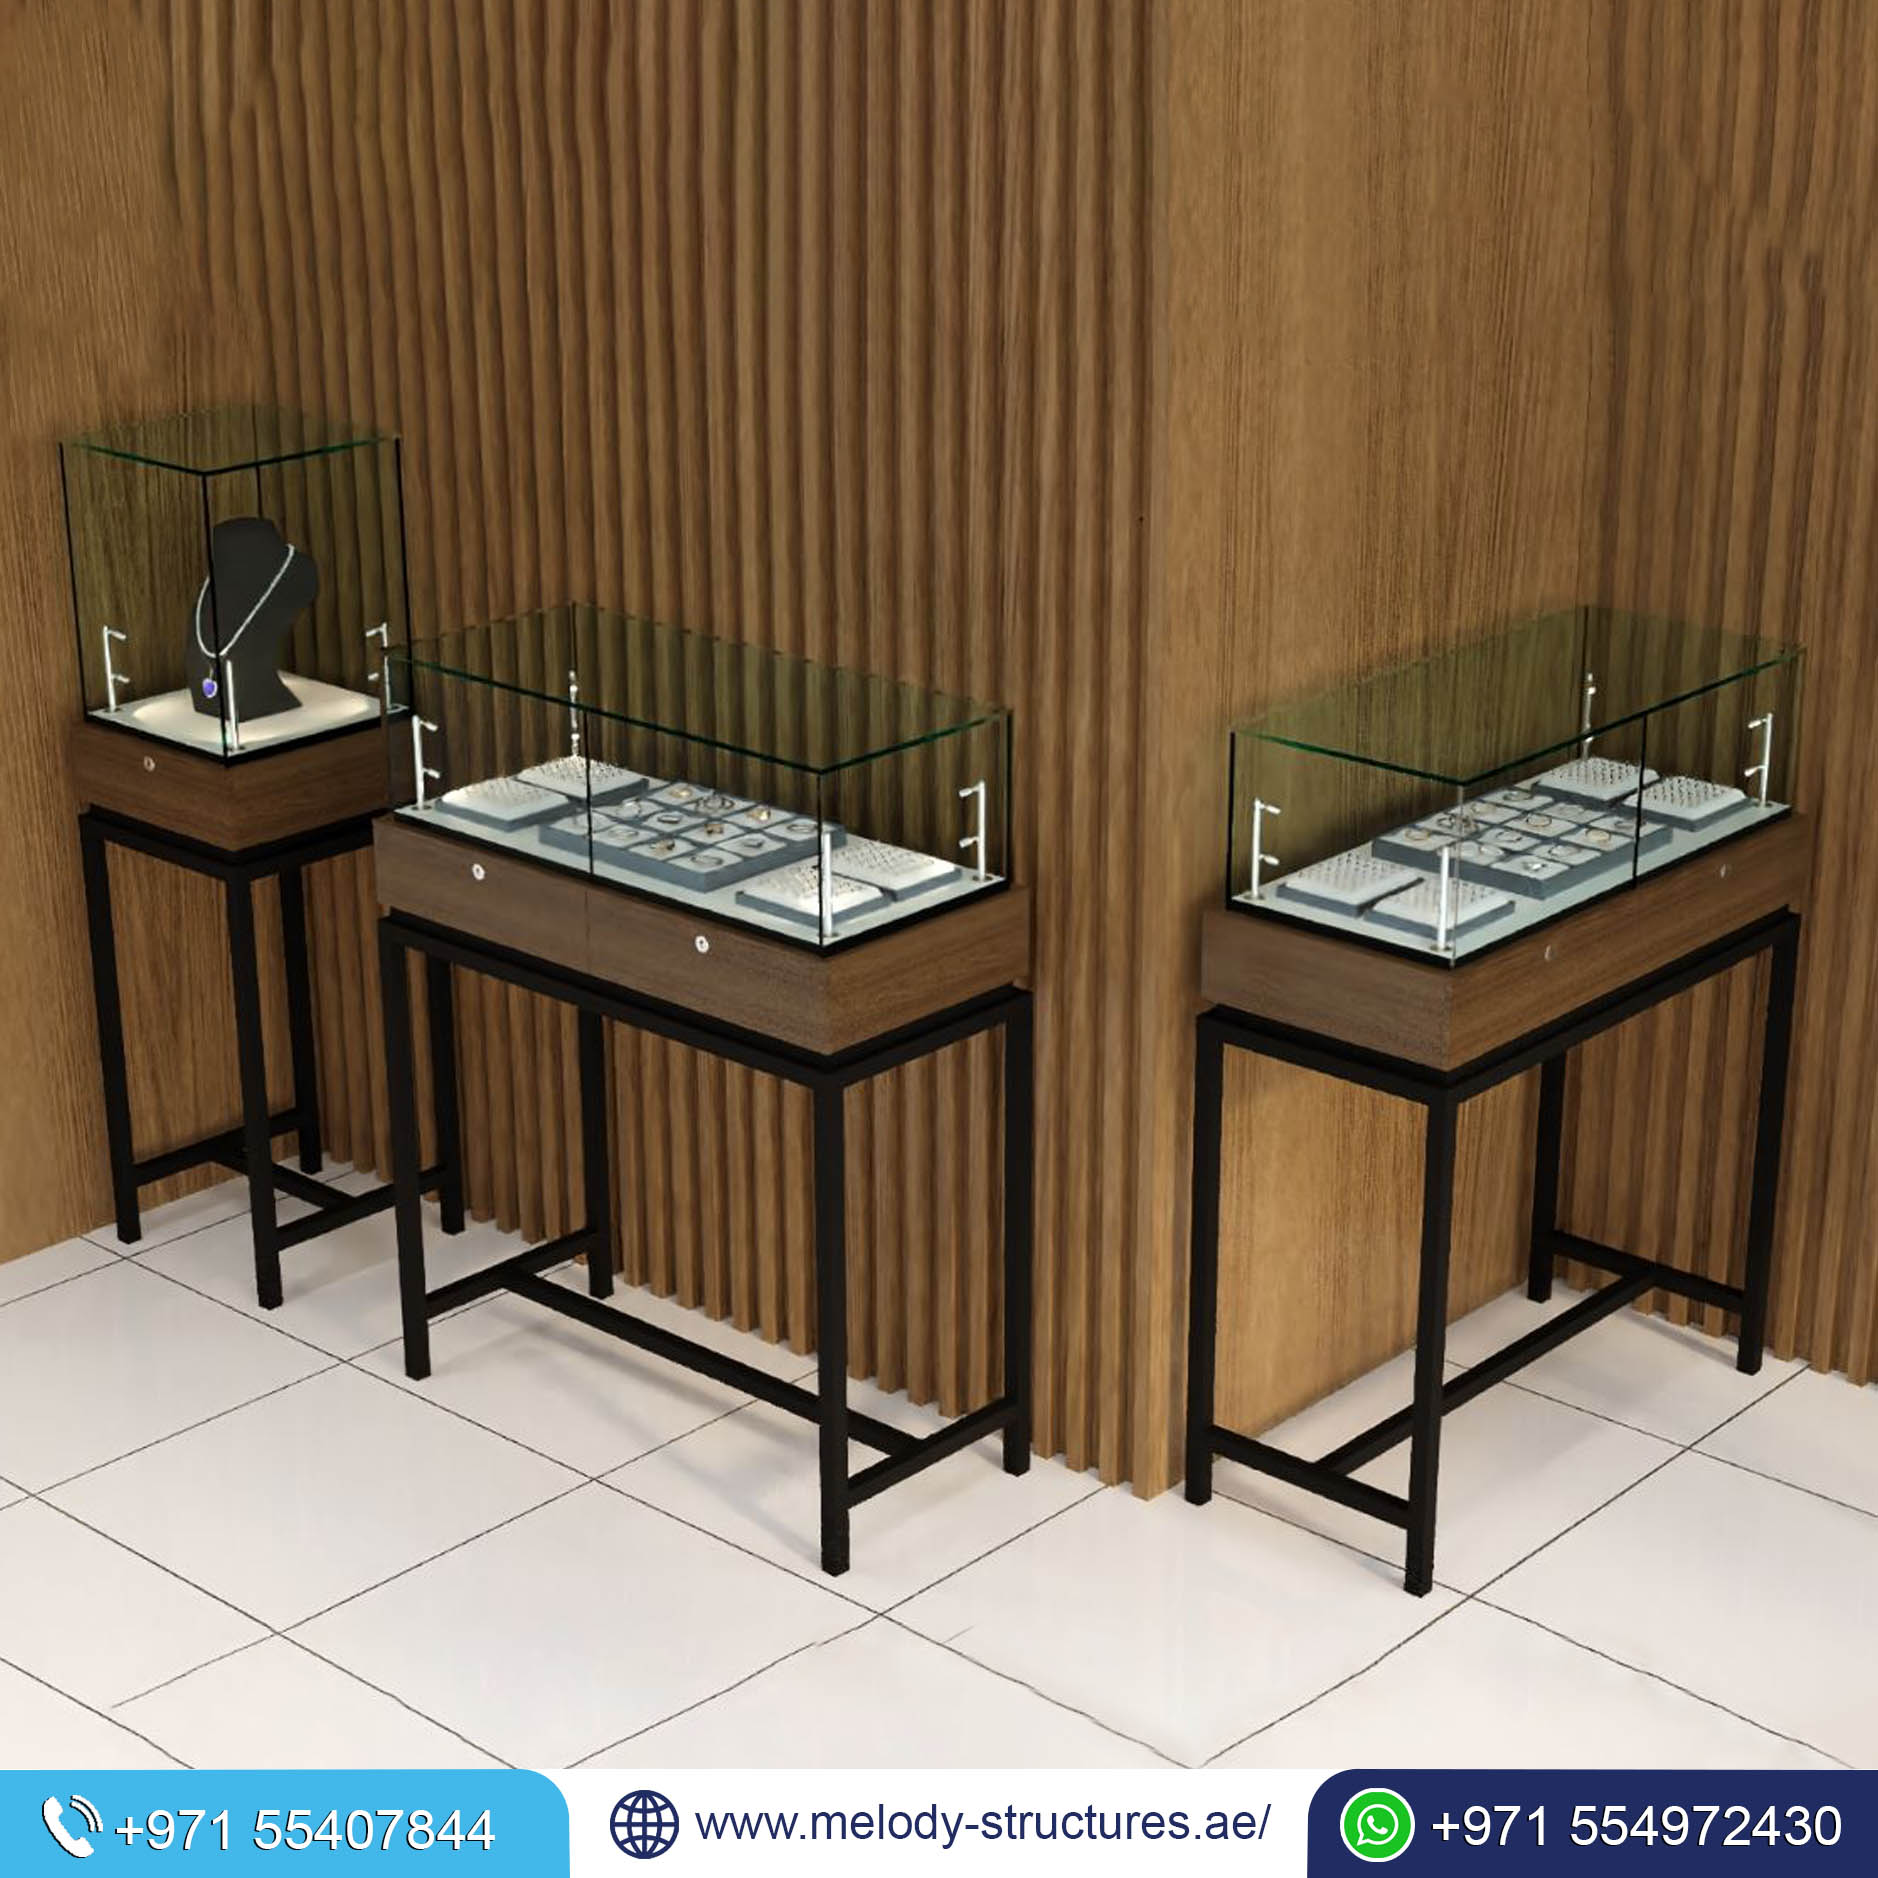 Jewelry Display Stand Suppliers in UAE | Display Stand in Dubai